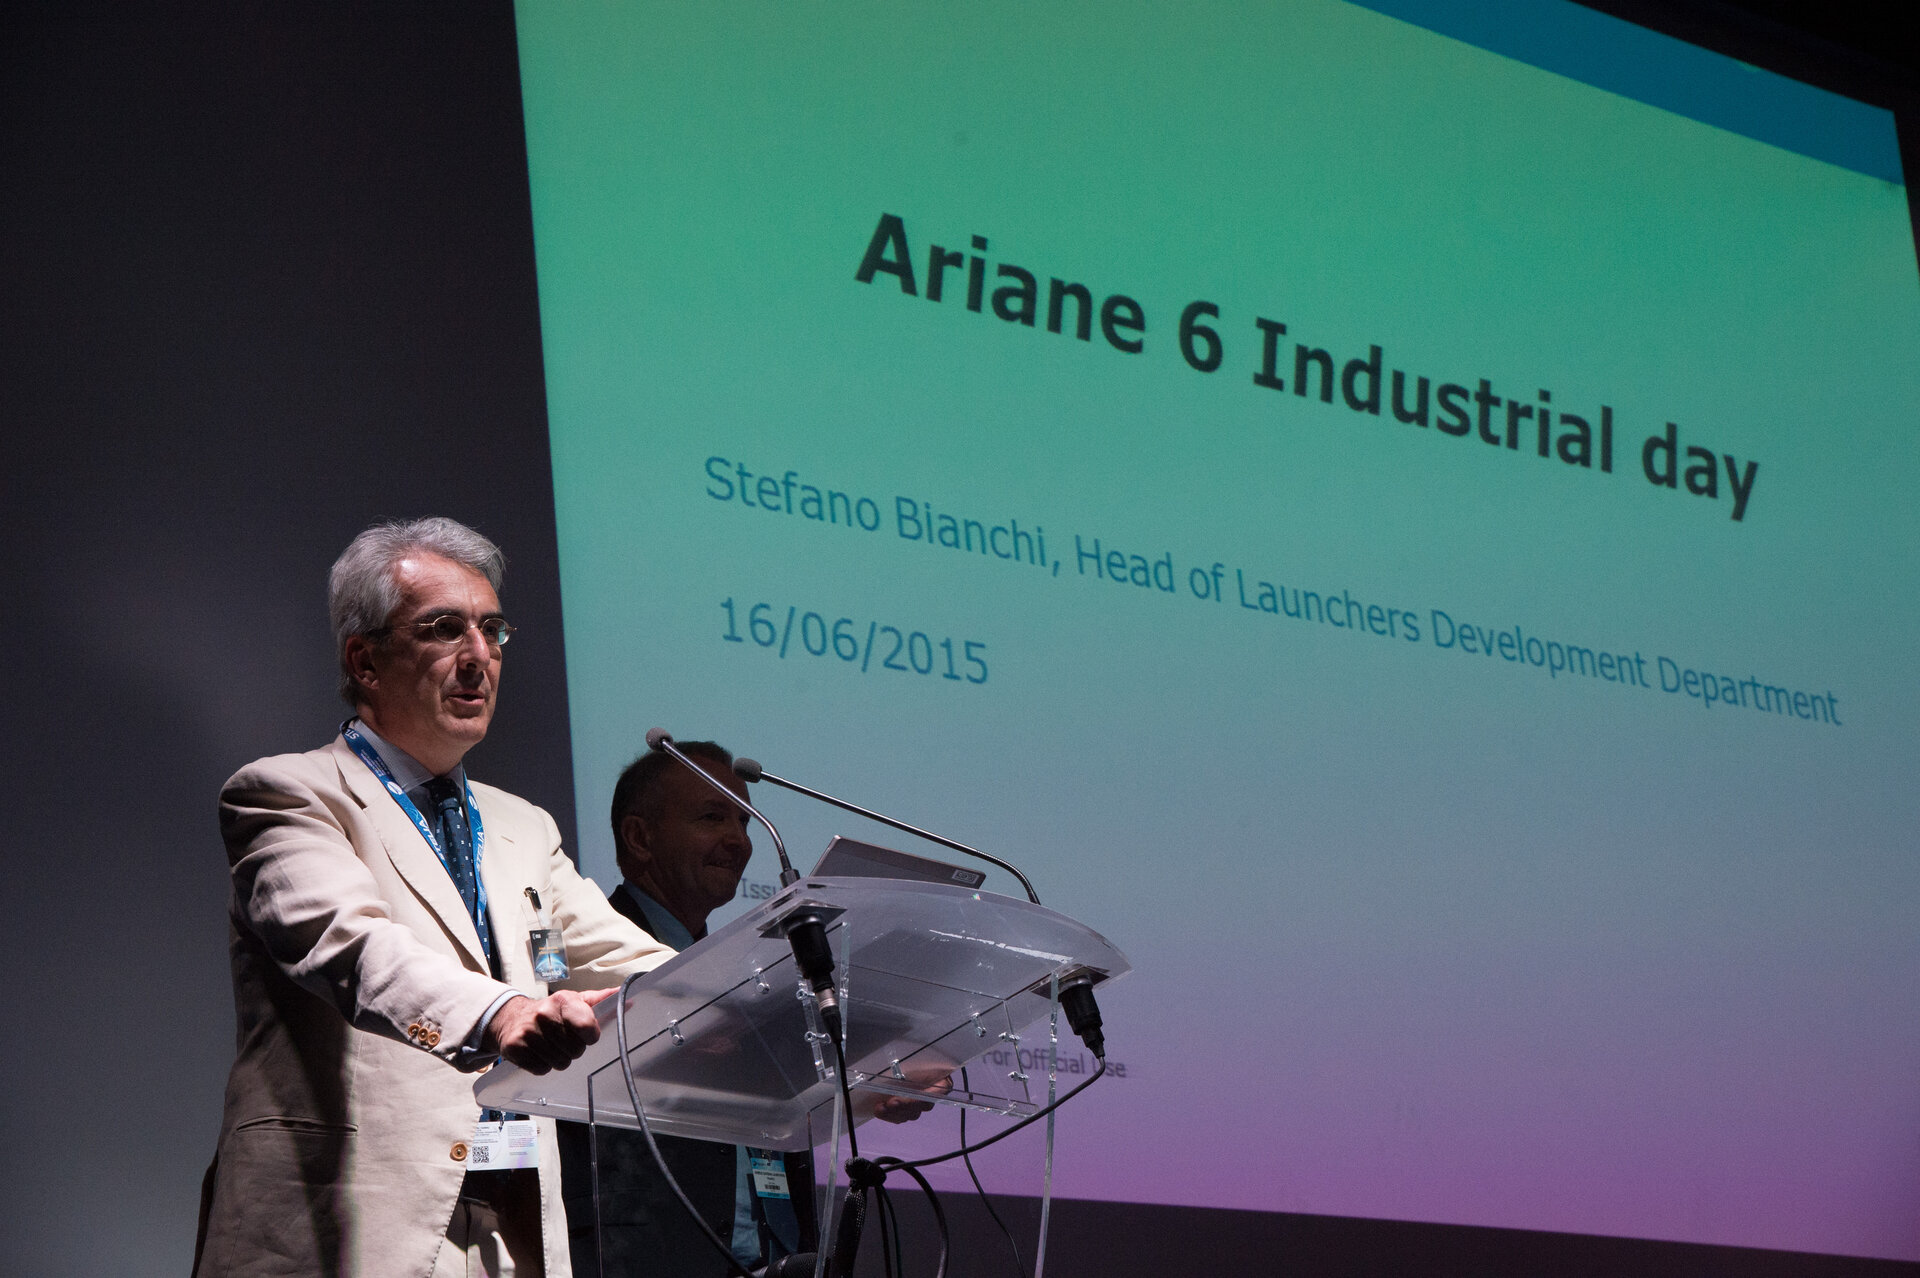 Stefano Bianchi at the "Ariane 6 Industrial Day" conference